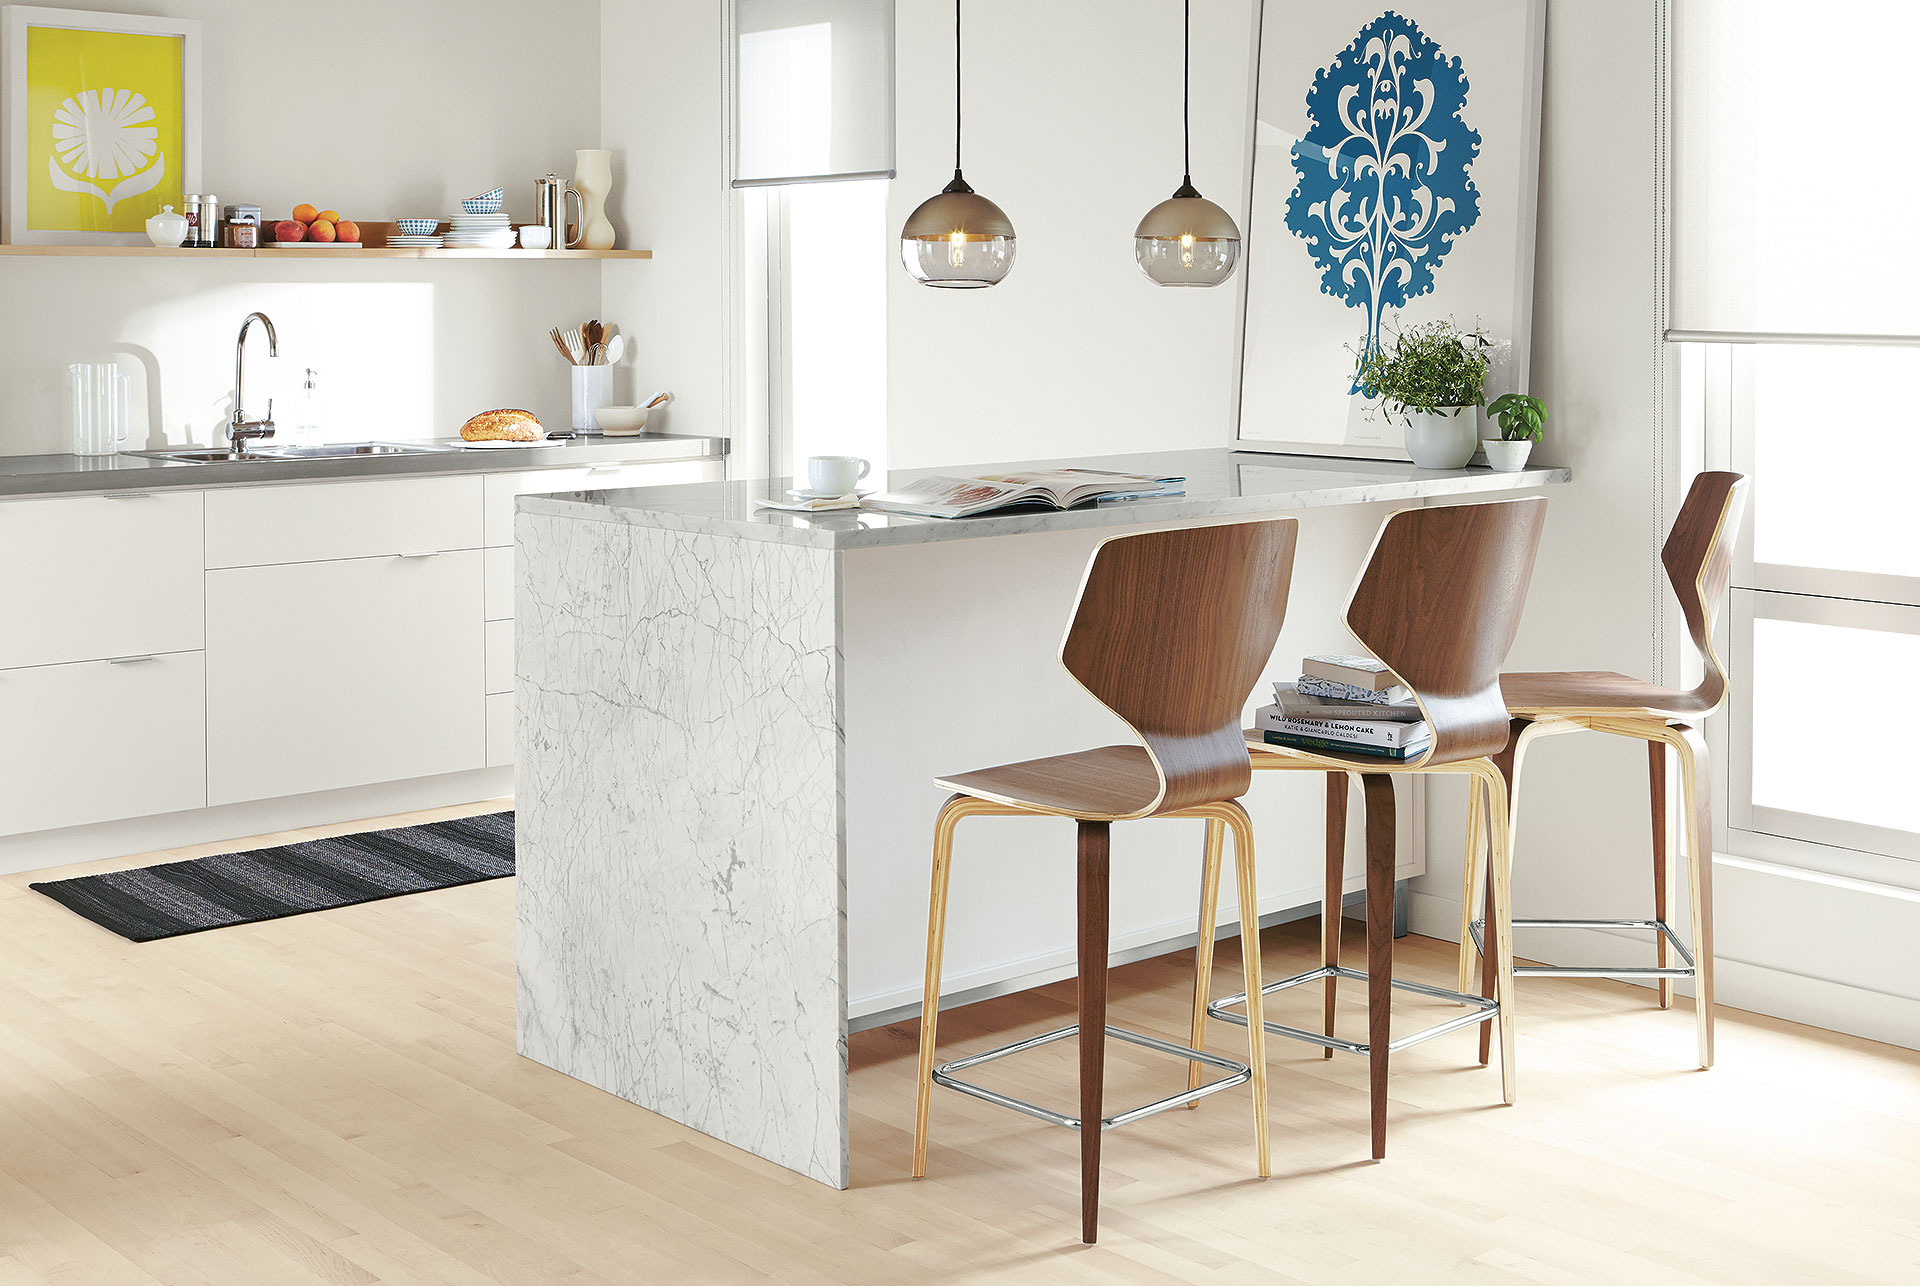 How To Choose Counter Bar Stools, Kitchen Bar Stools For Small Spaces